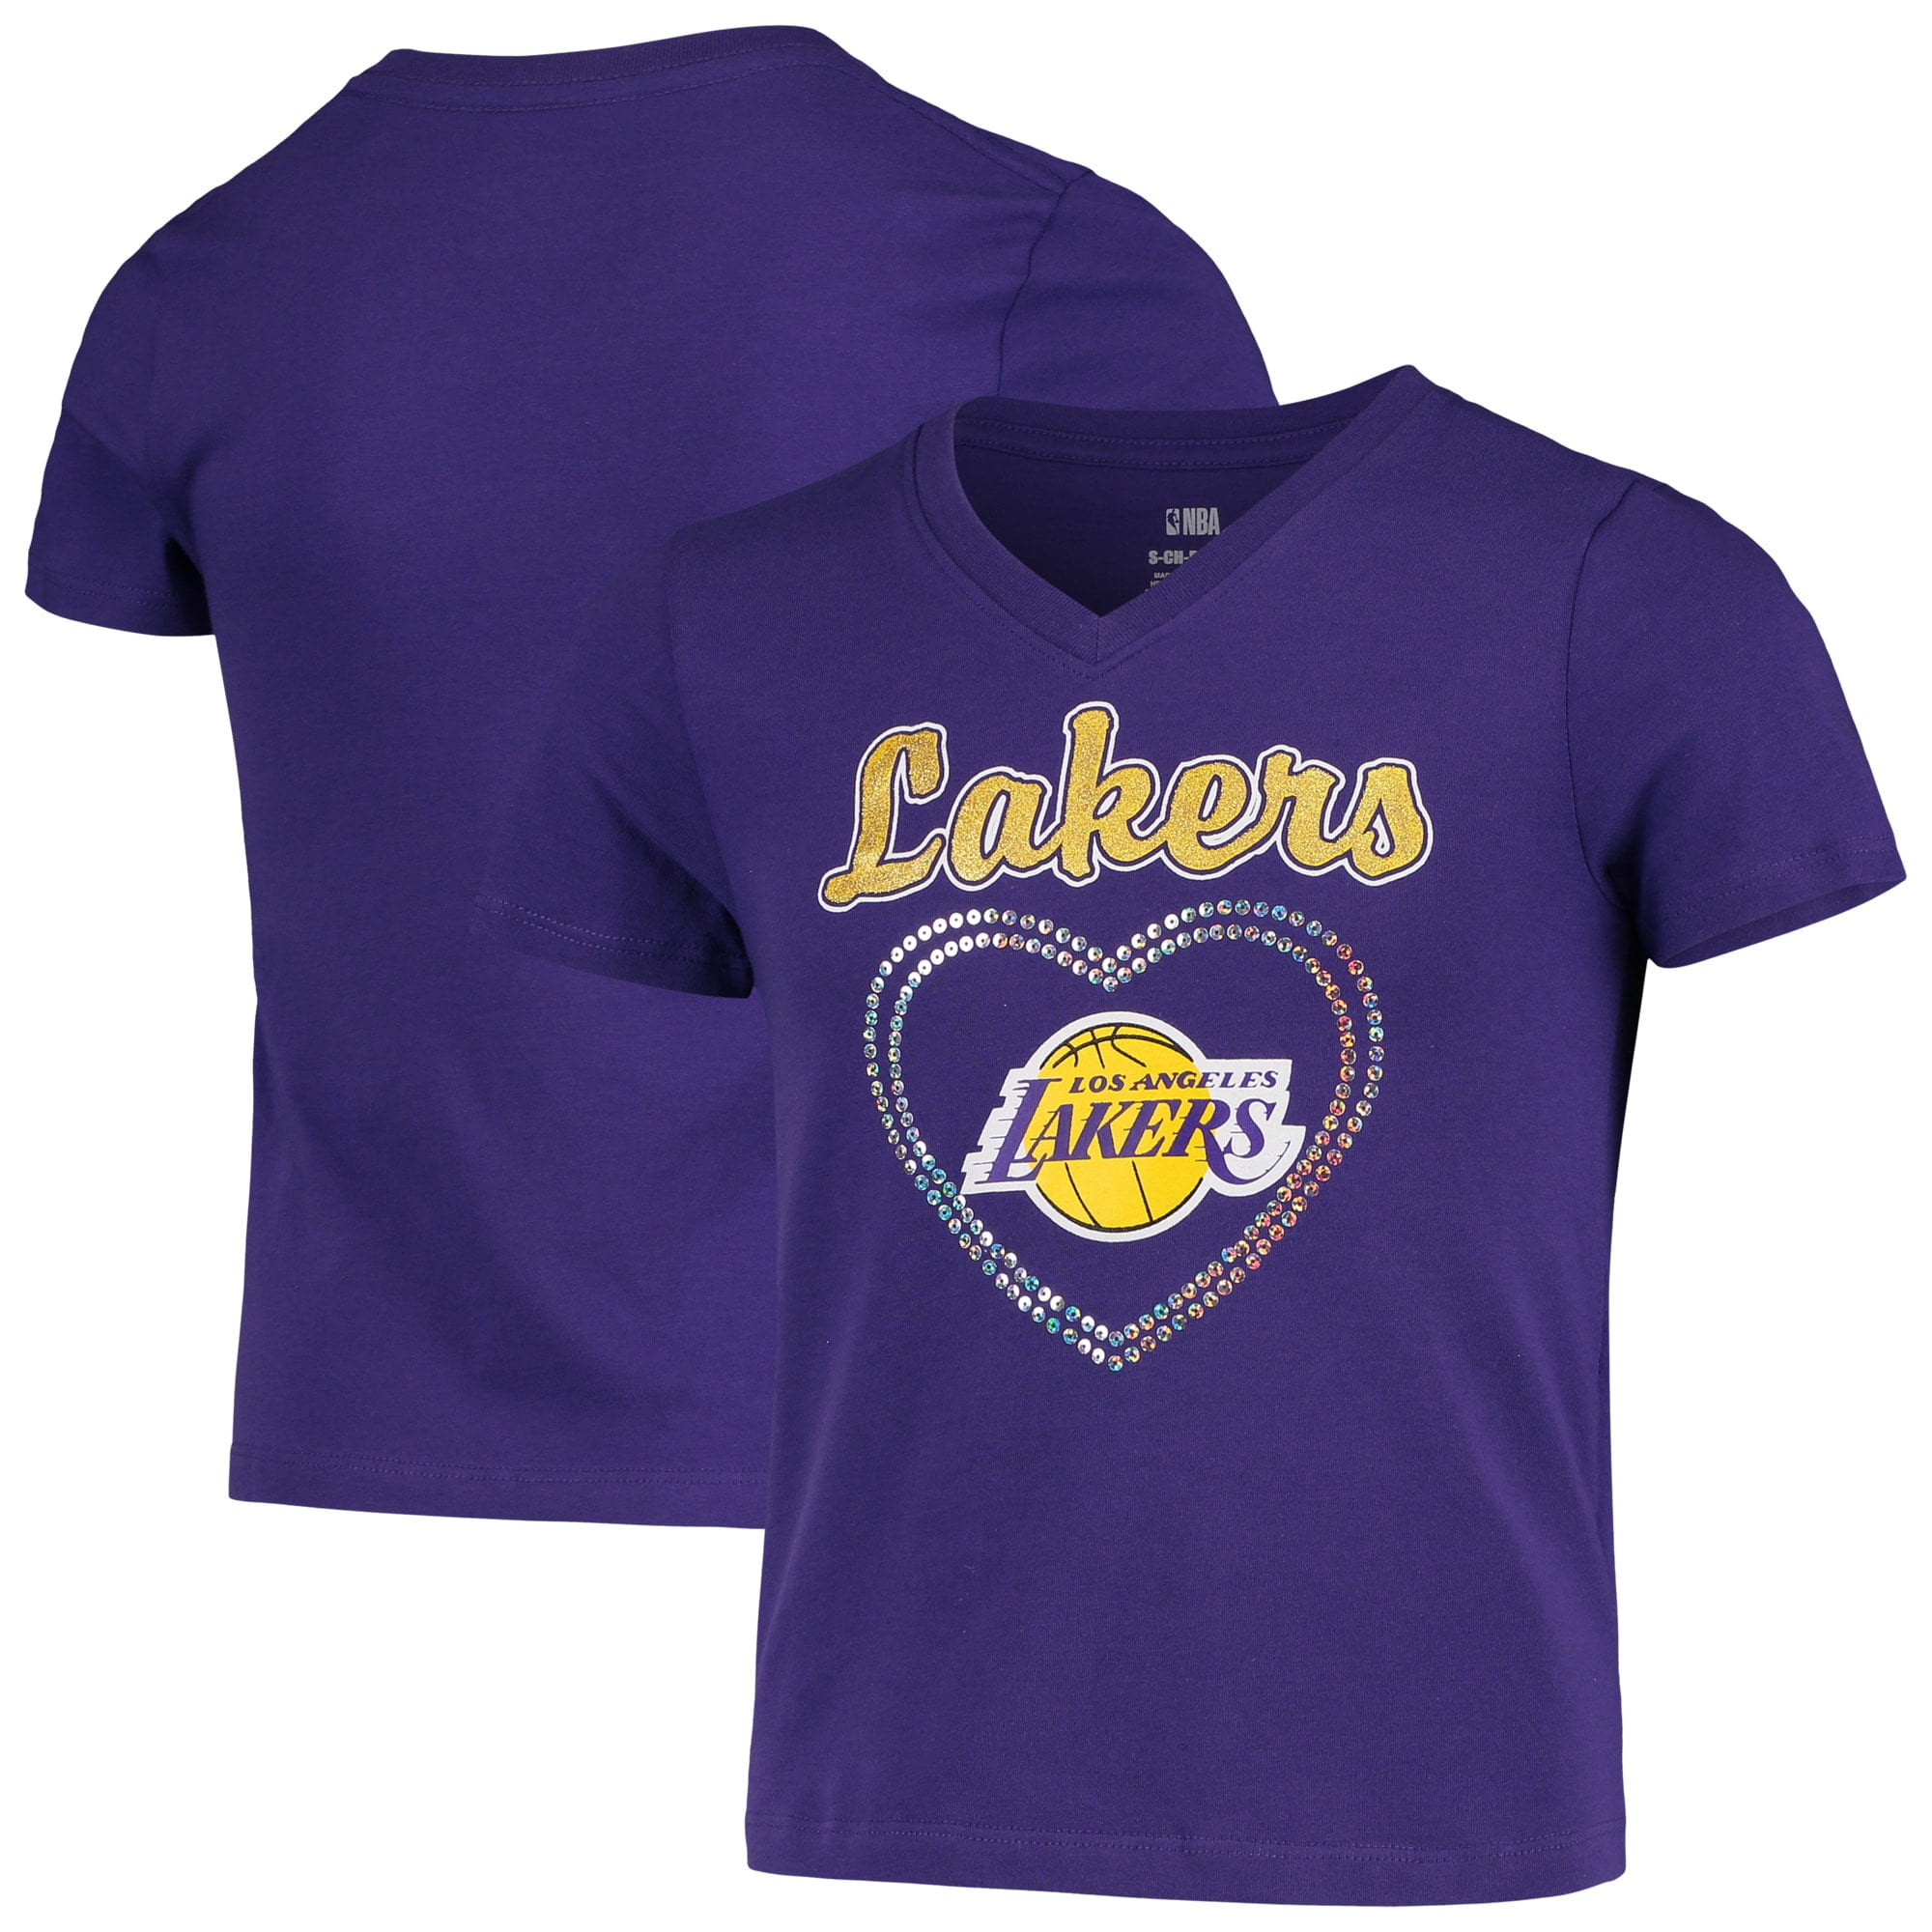 Los Angeles Lakers Girls Youth Heart V-Neck T-Shirt - Purple